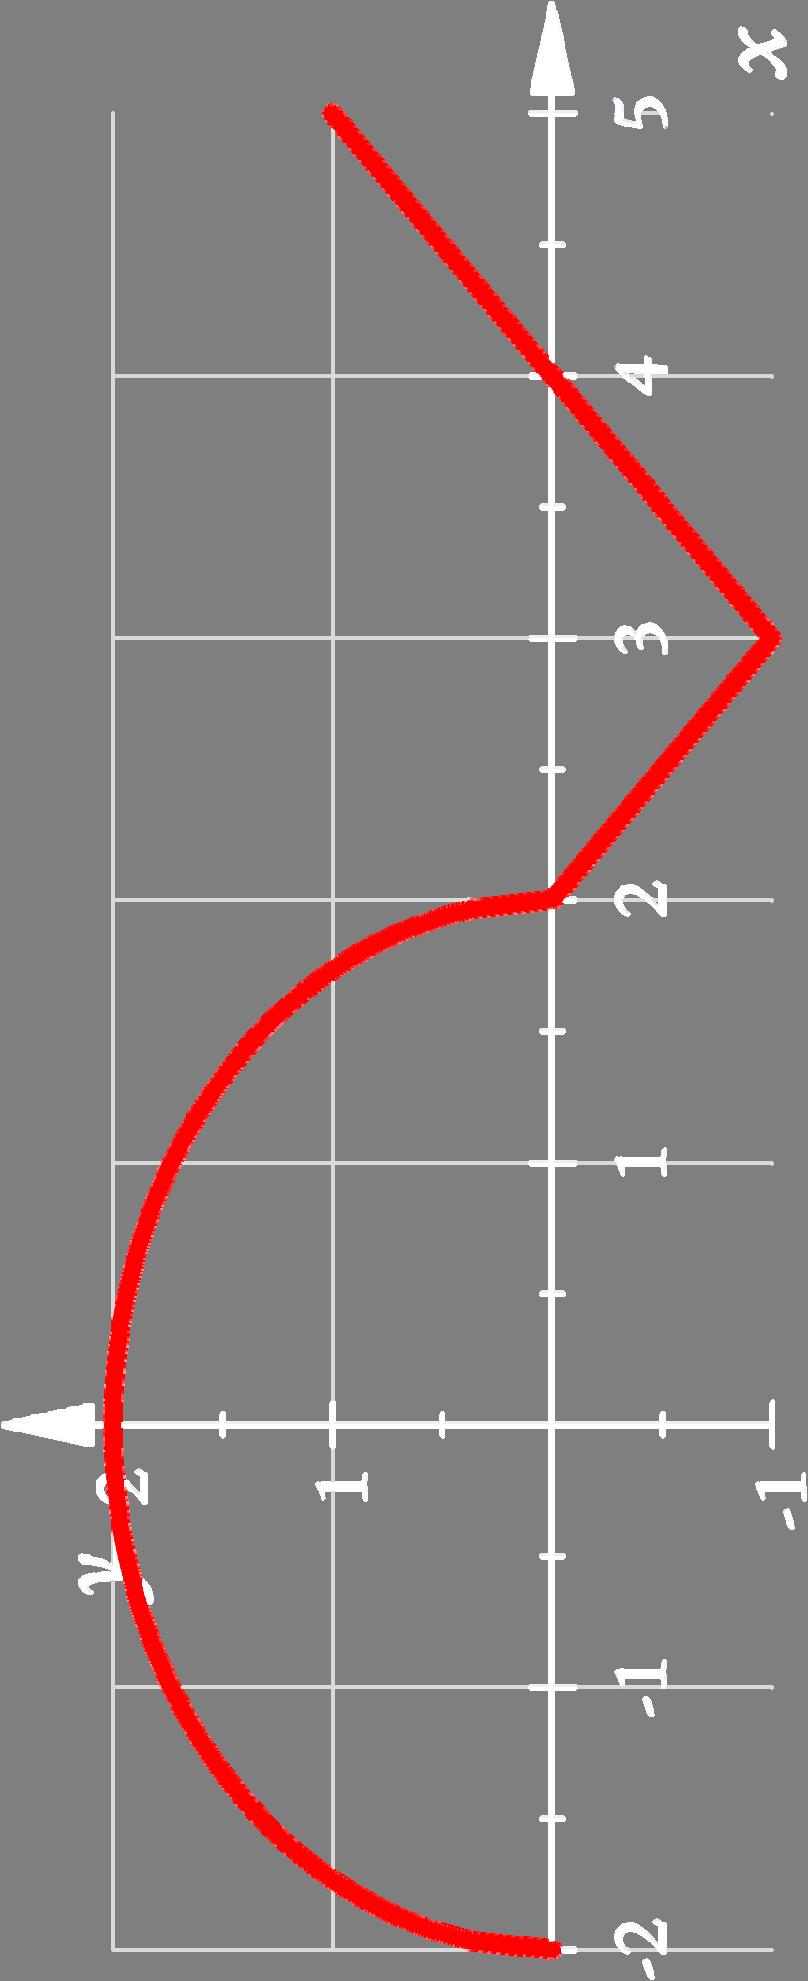 Eercise 9 (1997 AB5 BC5) The graph of a